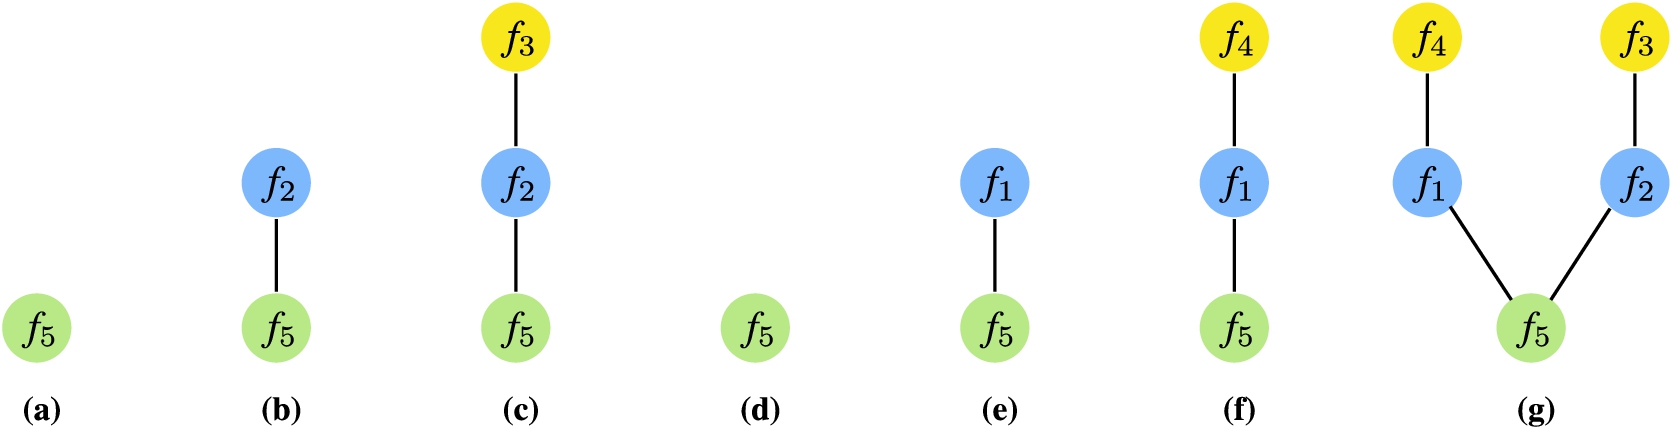 Recursively building the compatibility graph for the query in Fig. 4(a) by applying Algorithm 1 resulting in GC(Q,In1S). Yellow nodes denote the fragments relevant for P2, blue nodes the fragments relevant for P1, and the green nodes the fragments relevant for P3.